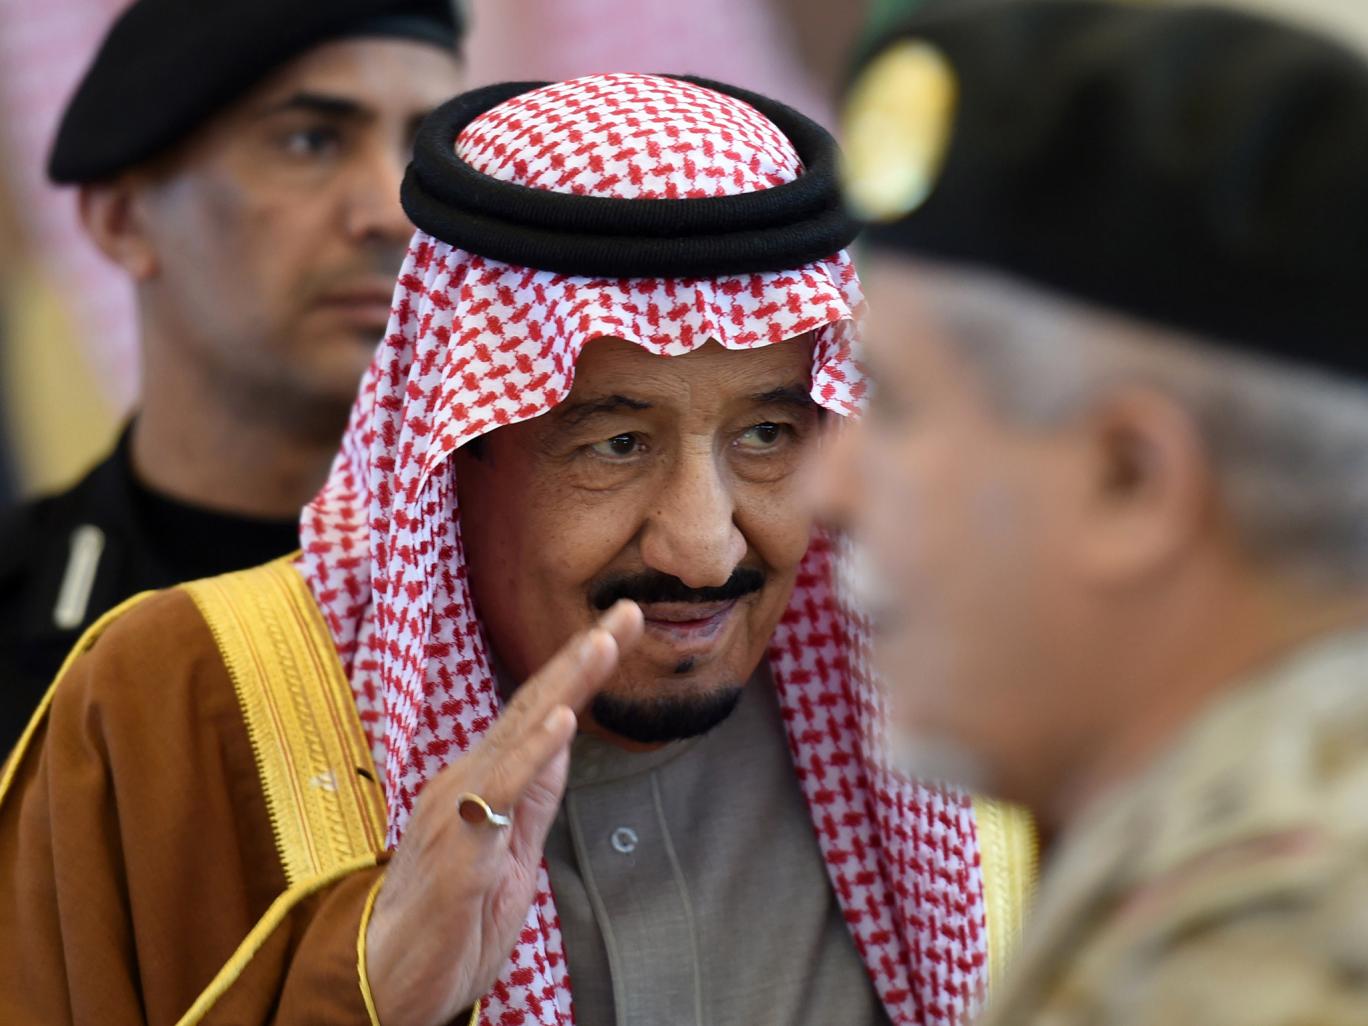 Saudi-Led Coalition To Oppose Terrorism Spread By Islamic States